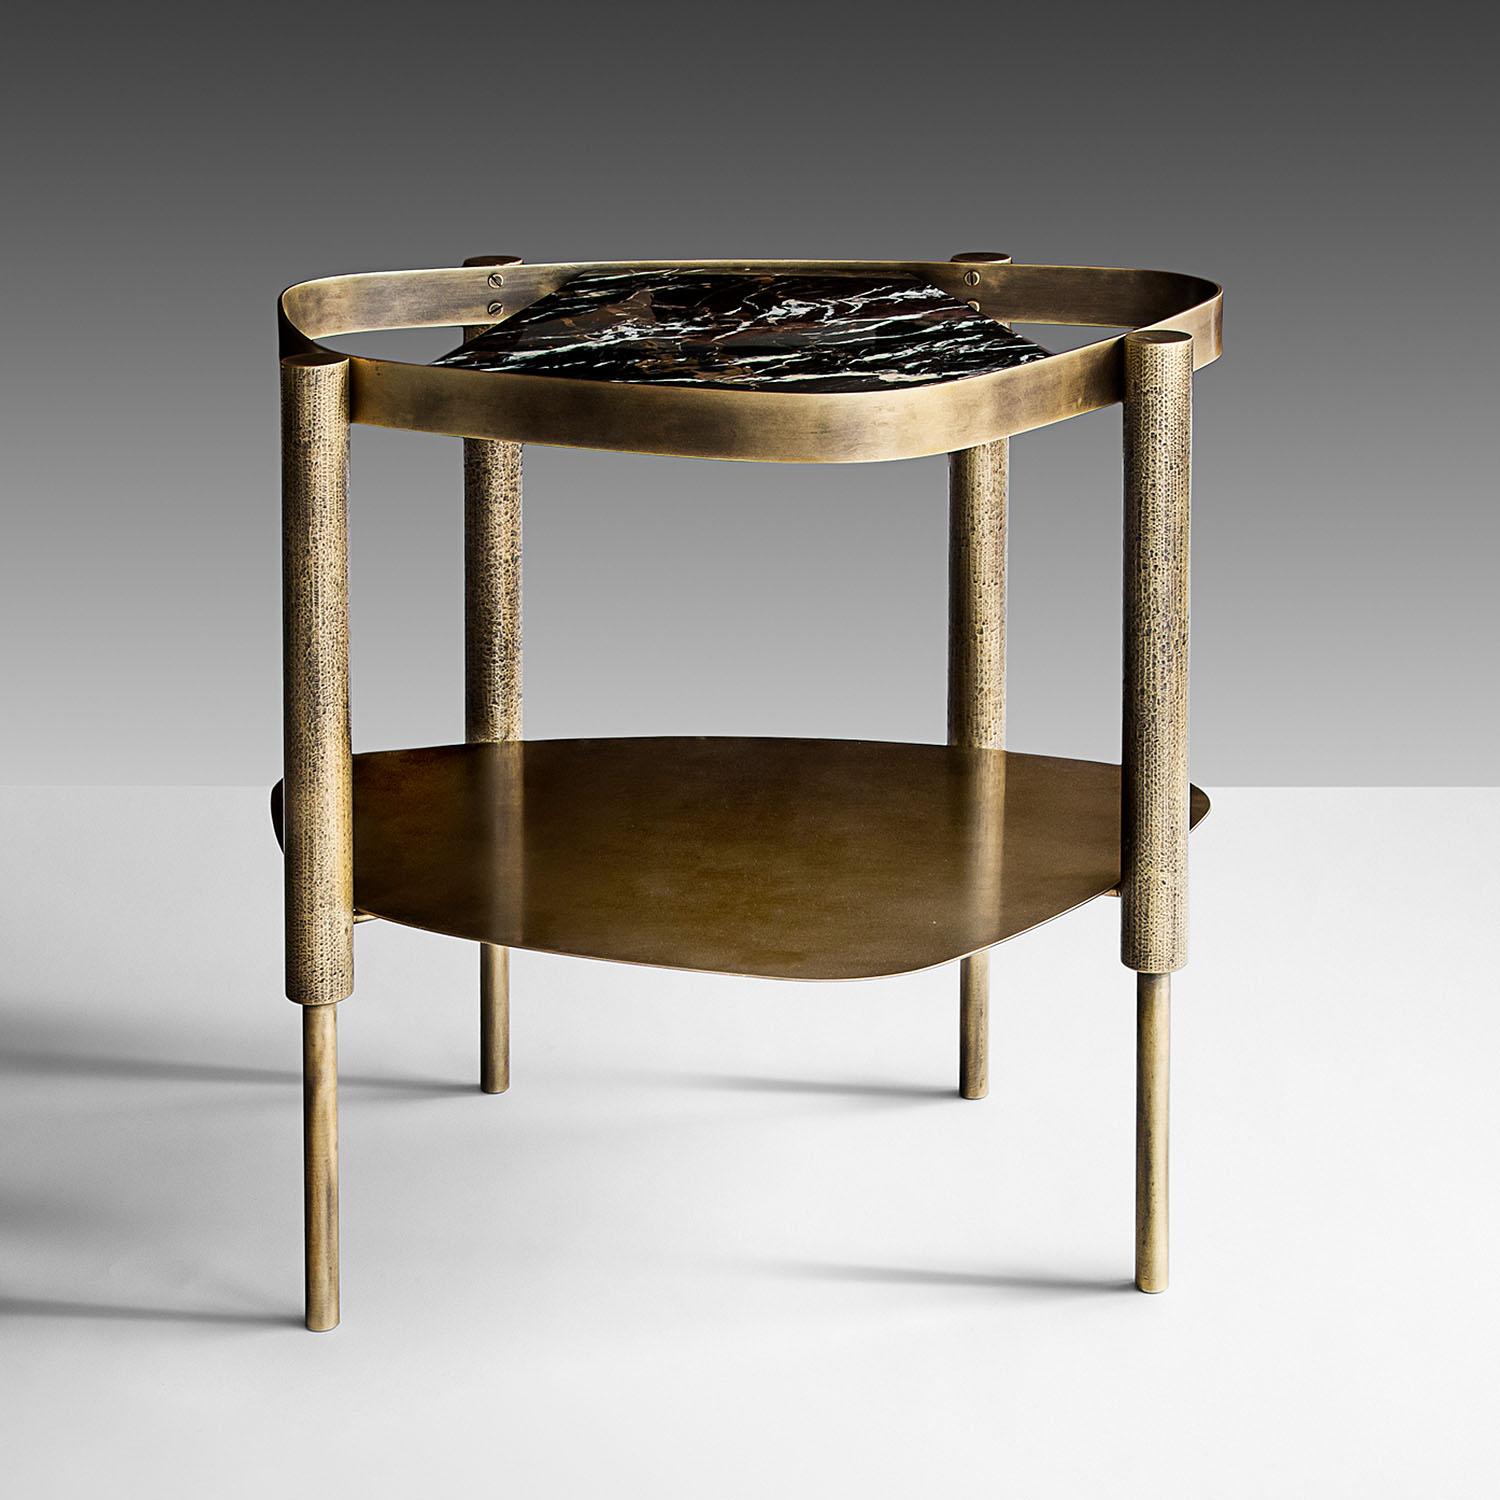 Portuguese Contemporary Marble & Brass Side Table, Bijou by Adam Court for Okha For Sale